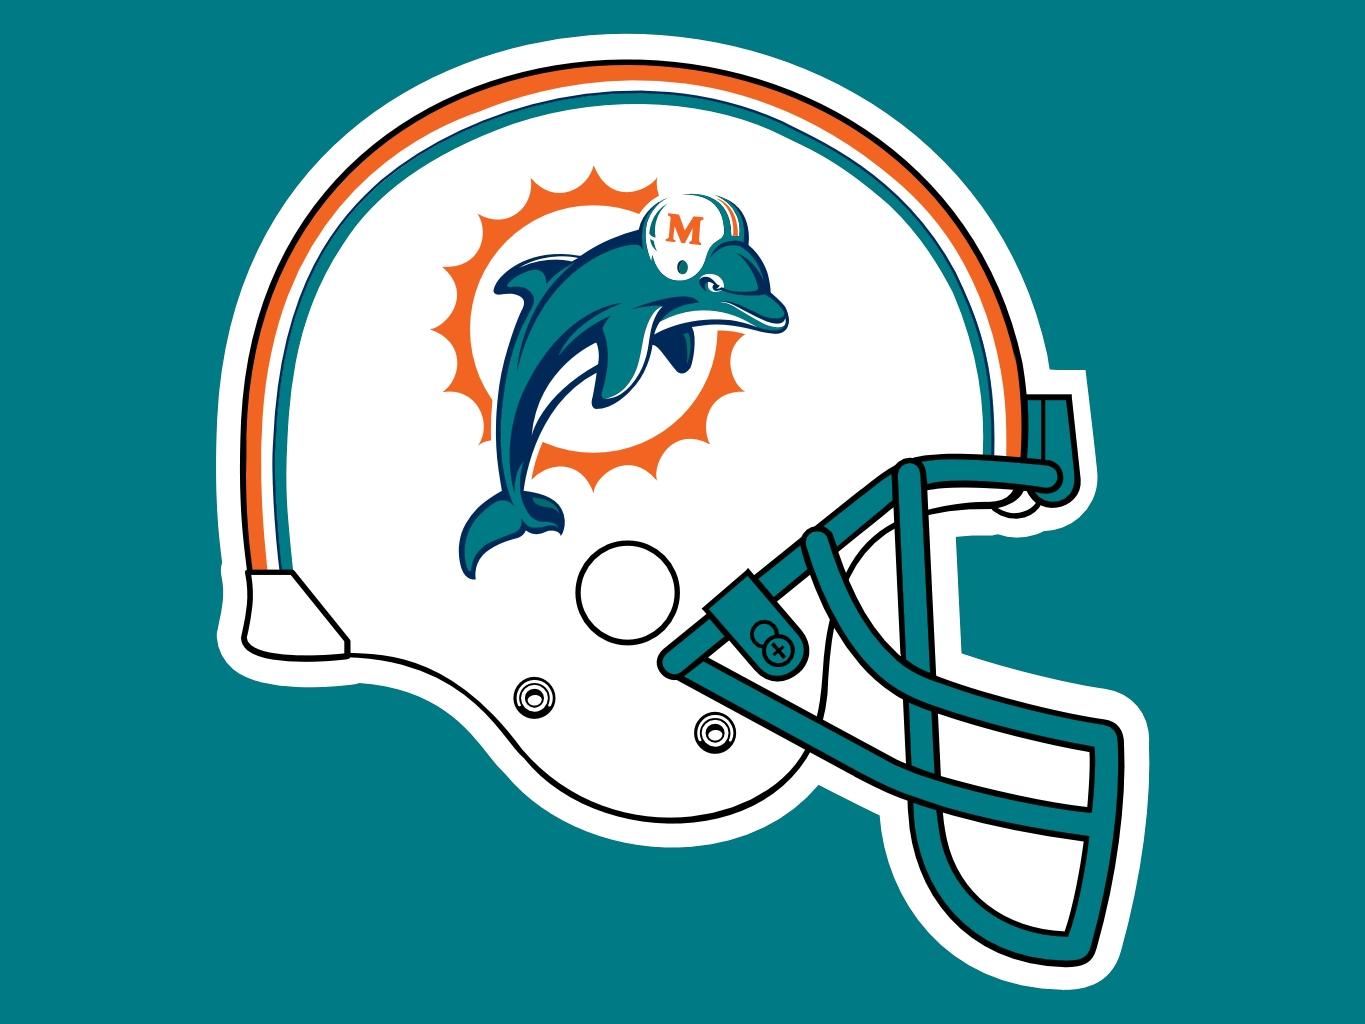 Workplace Bullying Lessons for the Miami Dolphins, NFL and All